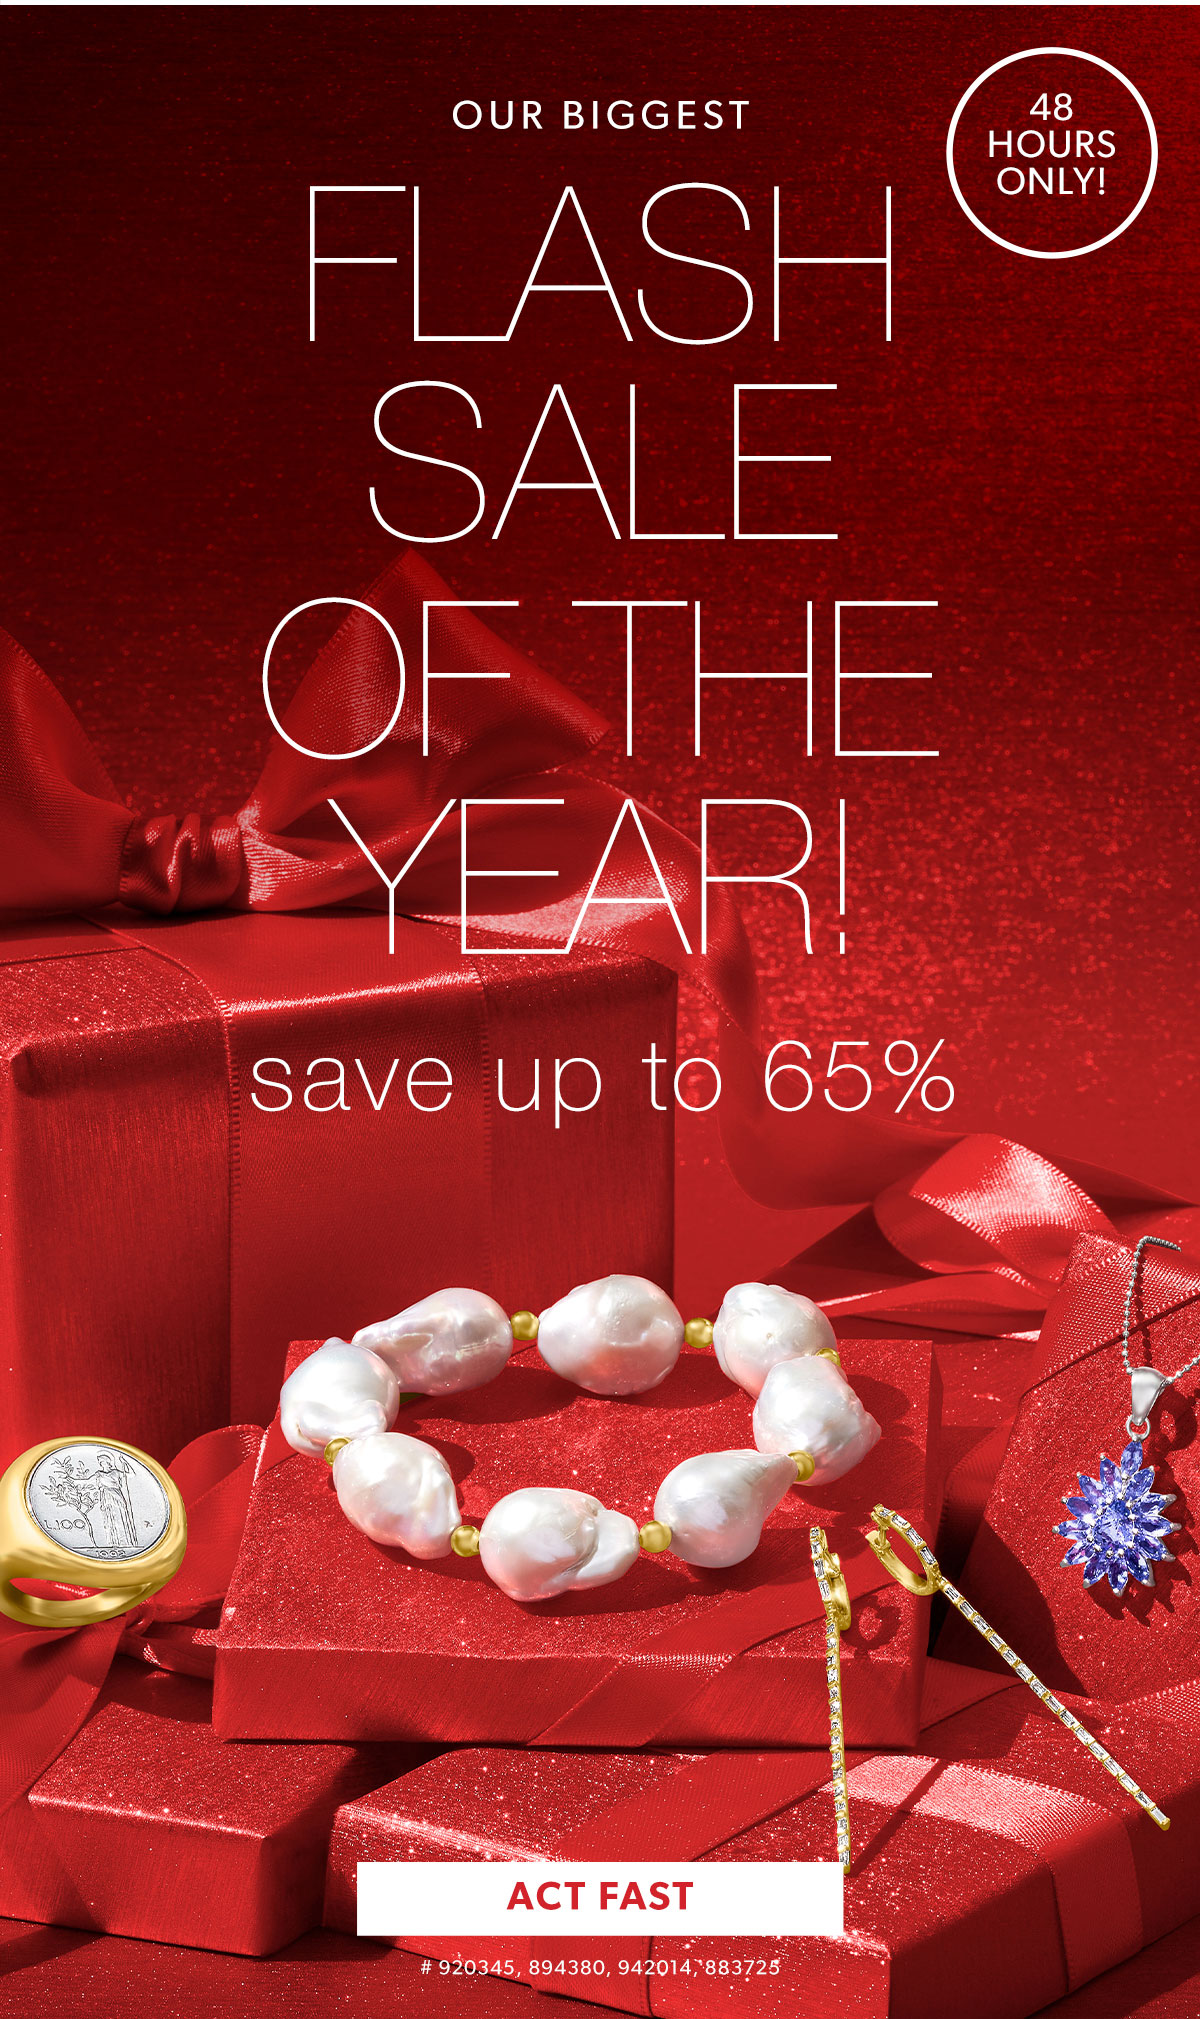 Flash Sale of The Year! Save Up To 65%